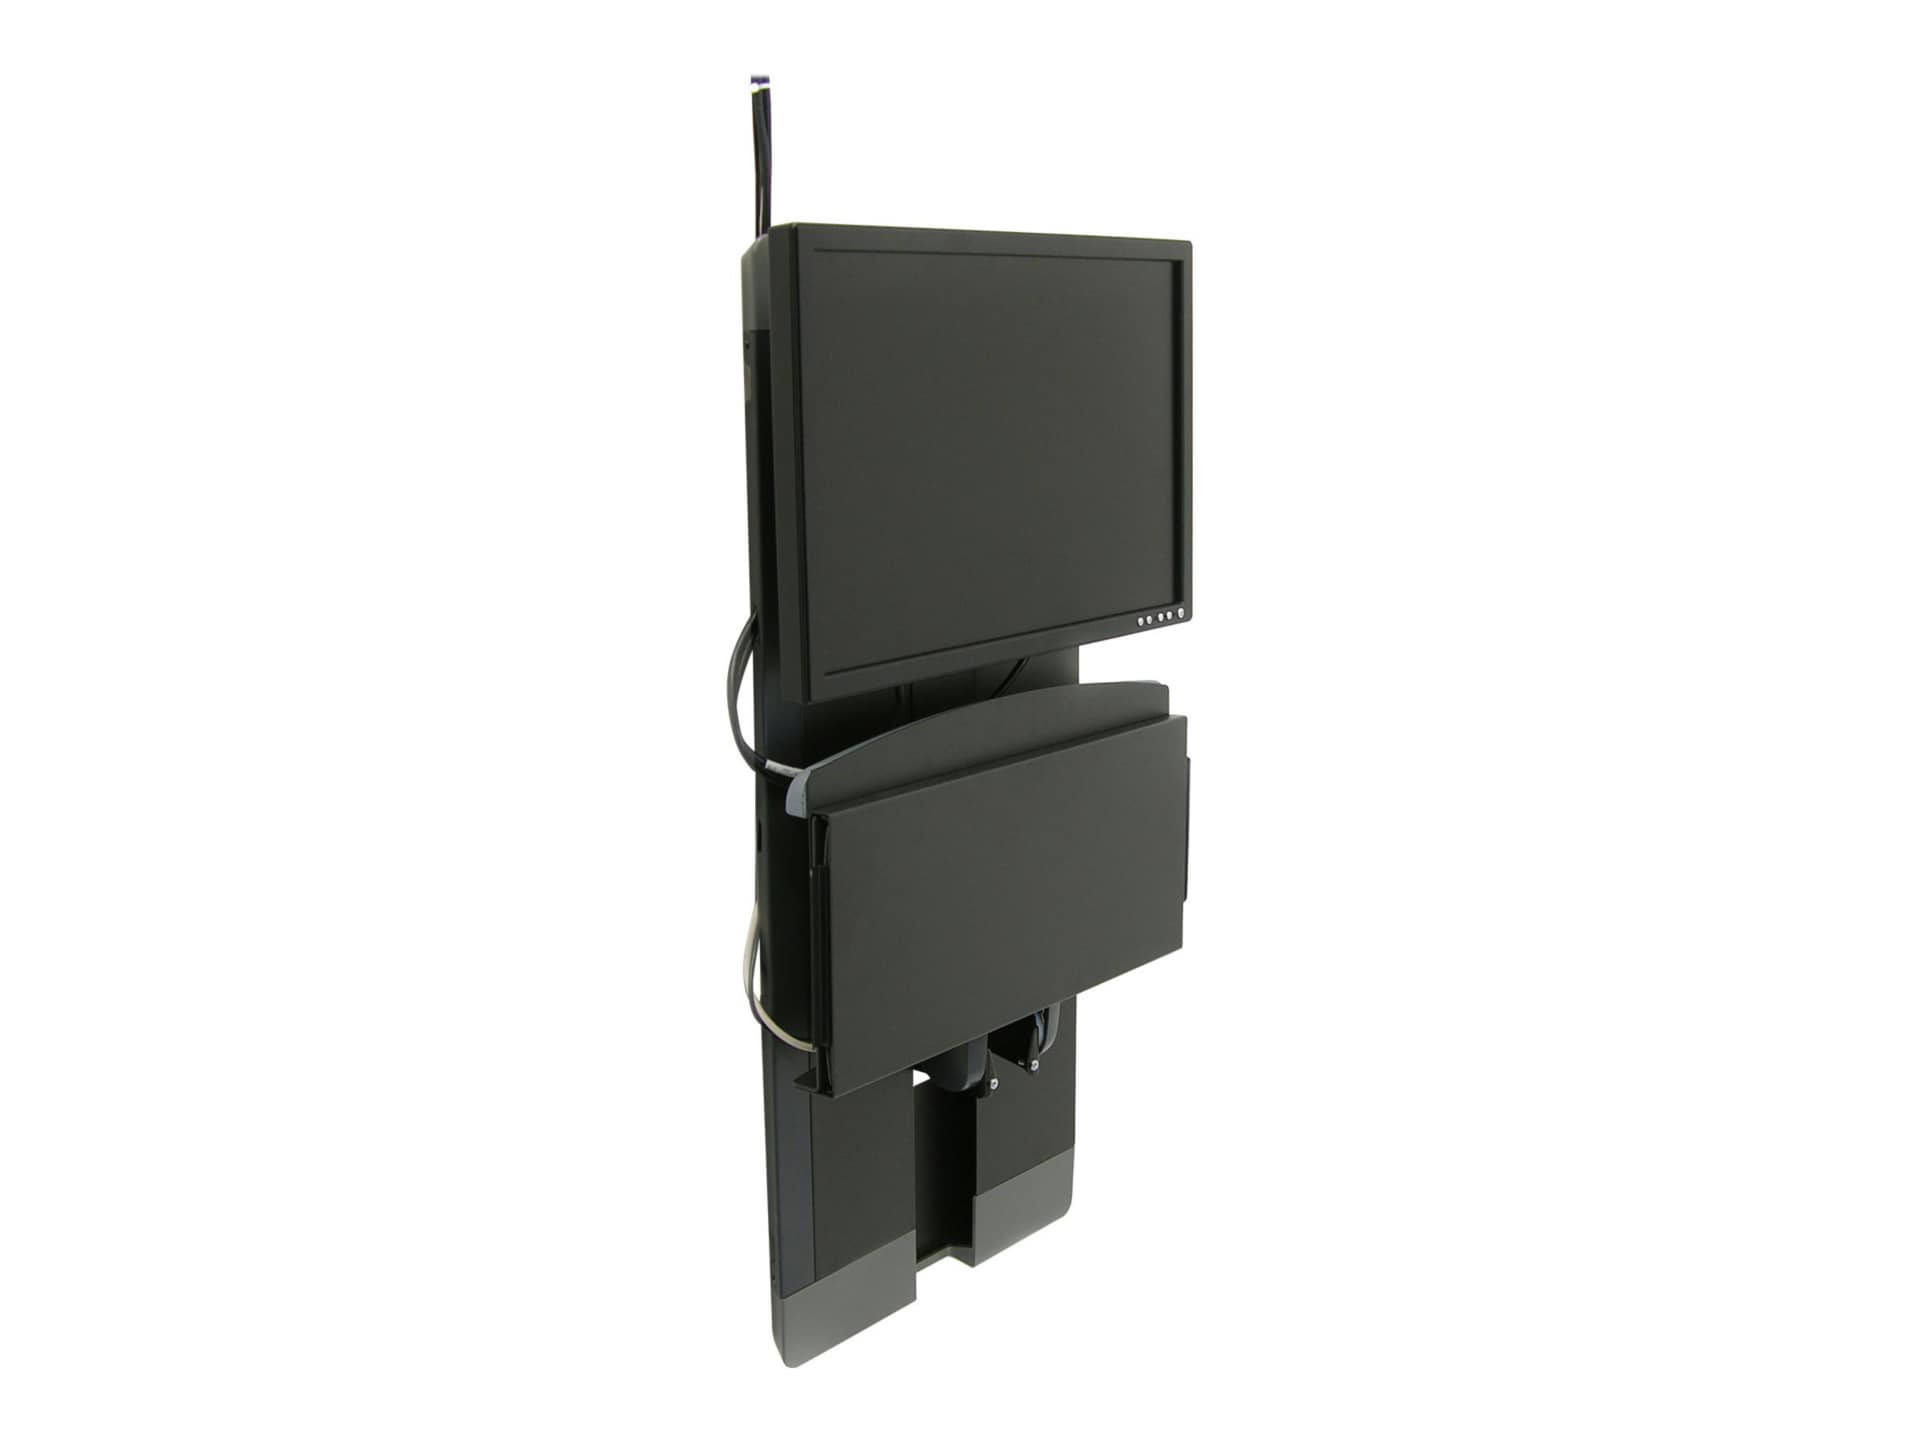 Ergotron StyleView mounting kit - low profile - for LCD display / keyboard